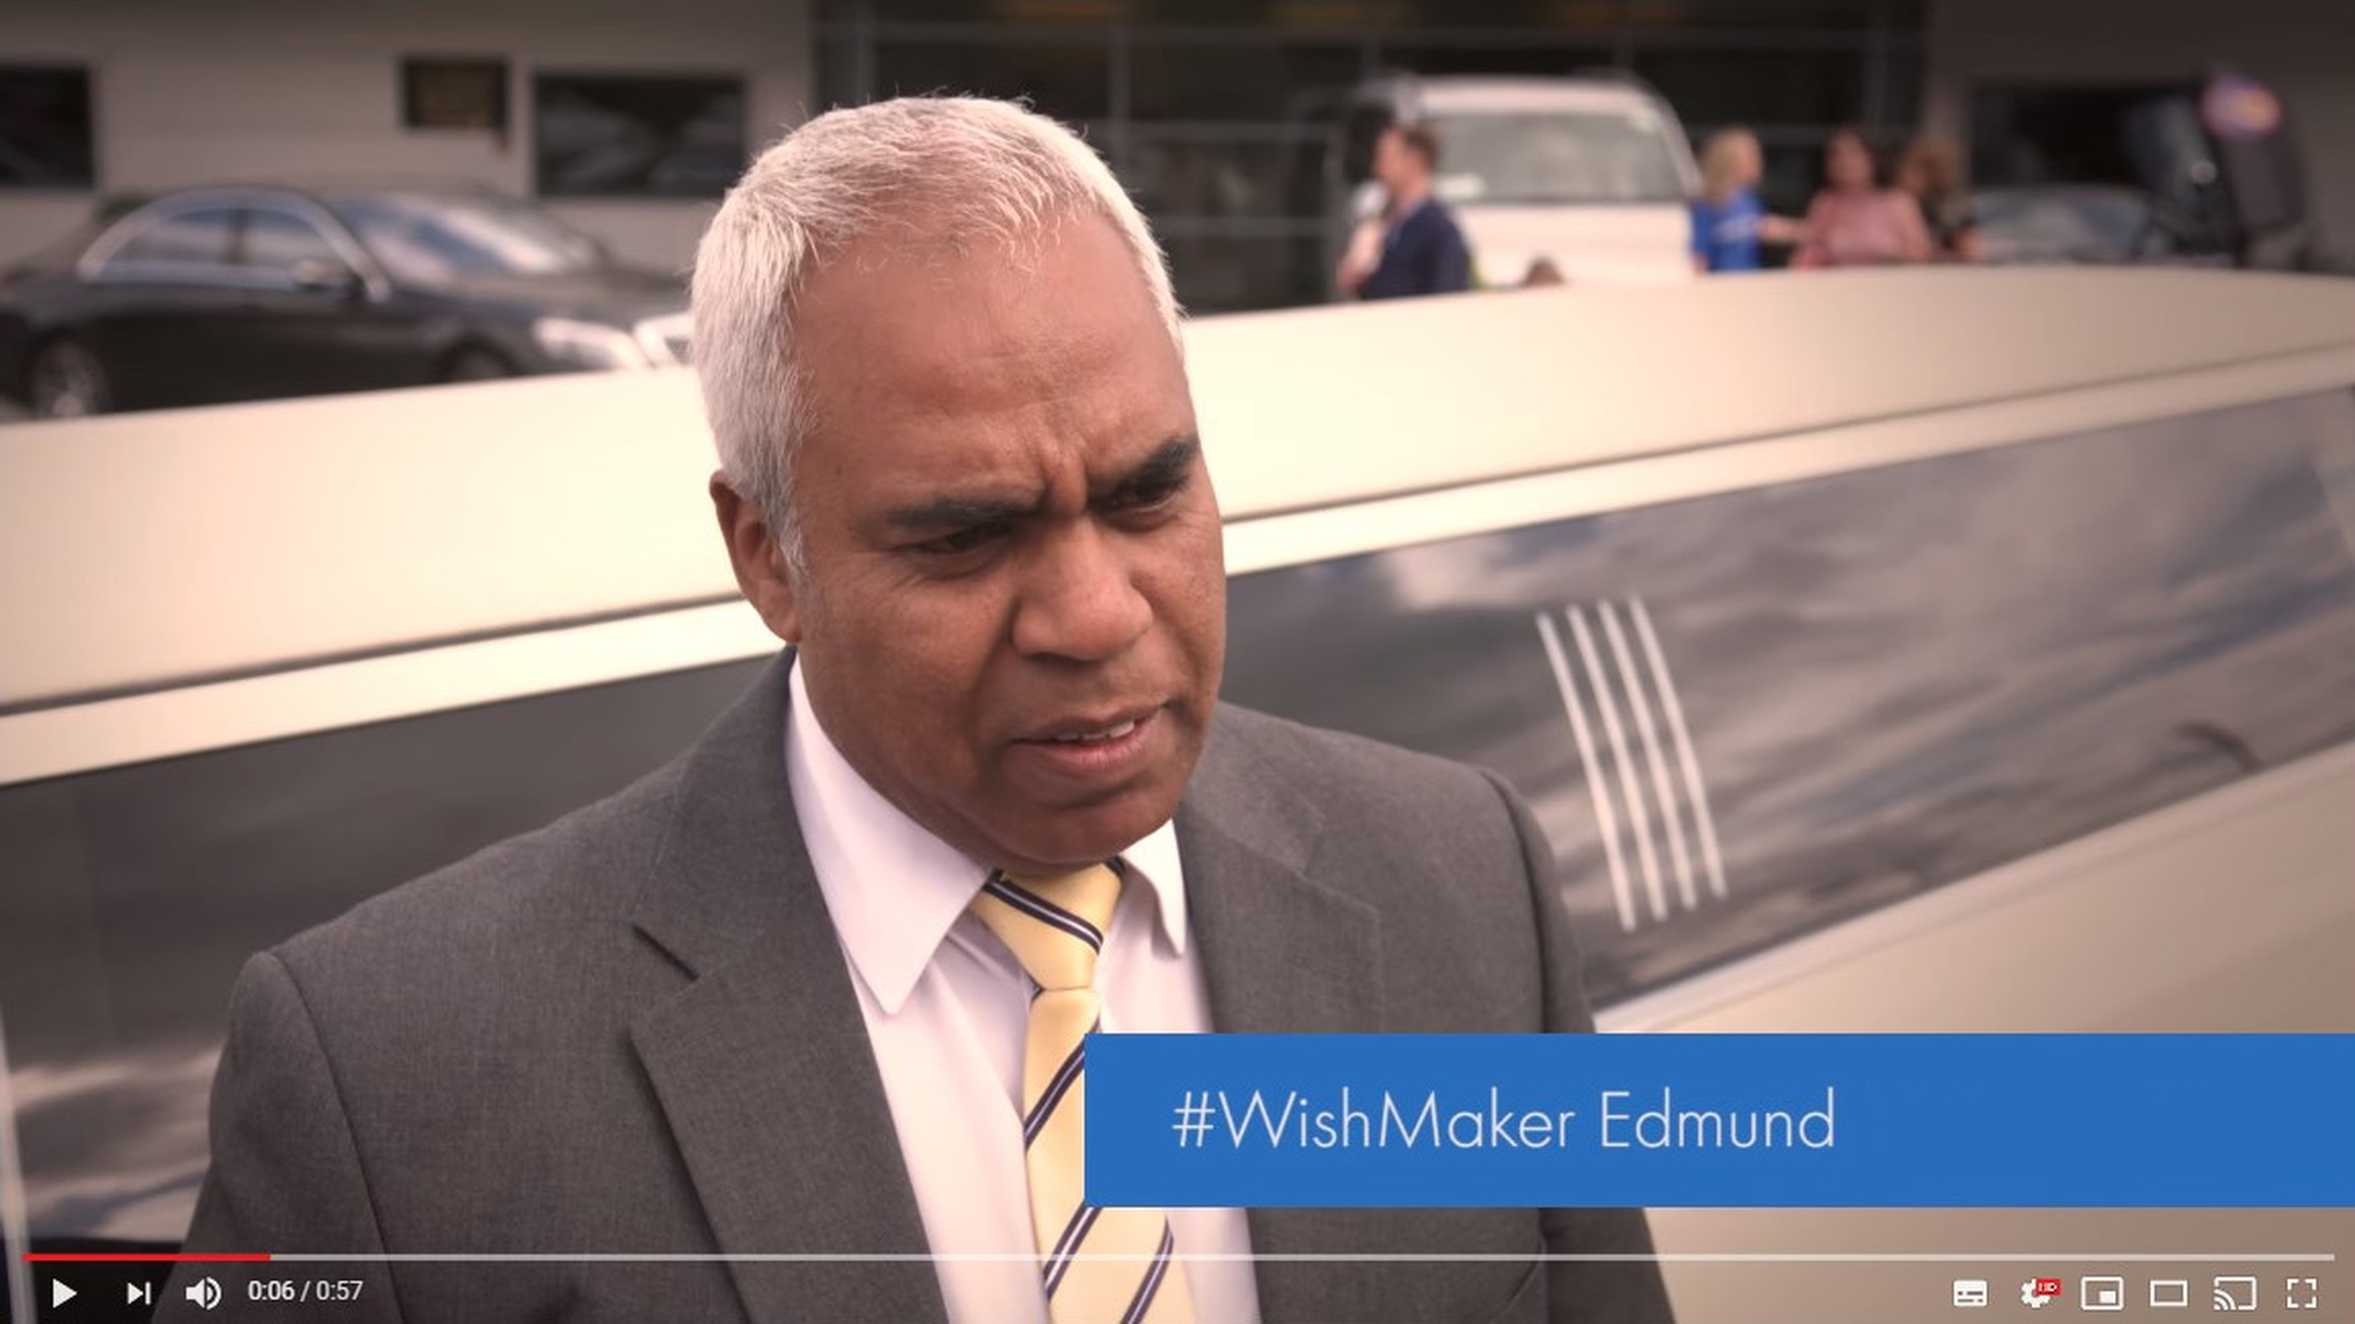 Limo driver Edmund, one of our unsung Wish Heroes